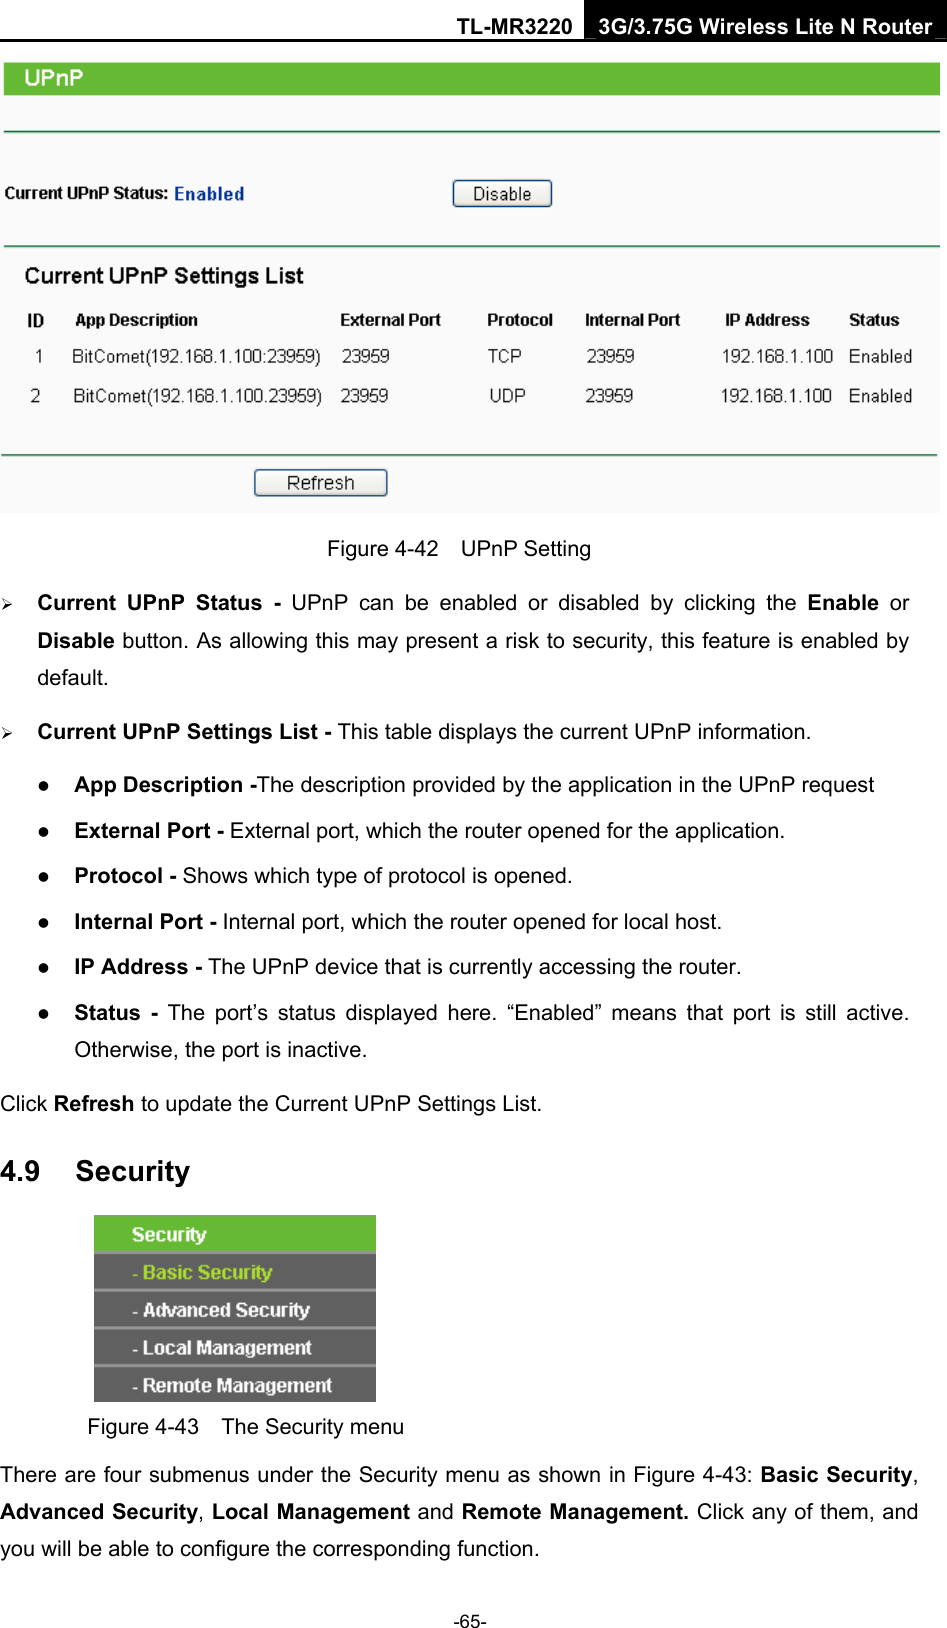 TL-MR3220 3G/3.75G Wireless Lite N Router -65-  Figure 4-42  UPnP Setting ¾ Current UPnP Status - UPnP can be enabled or disabled by clicking the Enable or Disable button. As allowing this may present a risk to security, this feature is enabled by default.  ¾ Current UPnP Settings List - This table displays the current UPnP information. z App Description -The description provided by the application in the UPnP request z External Port - External port, which the router opened for the application. z Protocol - Shows which type of protocol is opened. z Internal Port - Internal port, which the router opened for local host. z IP Address - The UPnP device that is currently accessing the router. z Status - The port’s status displayed here. “Enabled” means that port is still active. Otherwise, the port is inactive. Click Refresh to update the Current UPnP Settings List.   4.9  Security  Figure 4-43    The Security menu There are four submenus under the Security menu as shown in Figure 4-43: Basic Security, Advanced Security, Local Management and Remote Management. Click any of them, and you will be able to configure the corresponding function. 